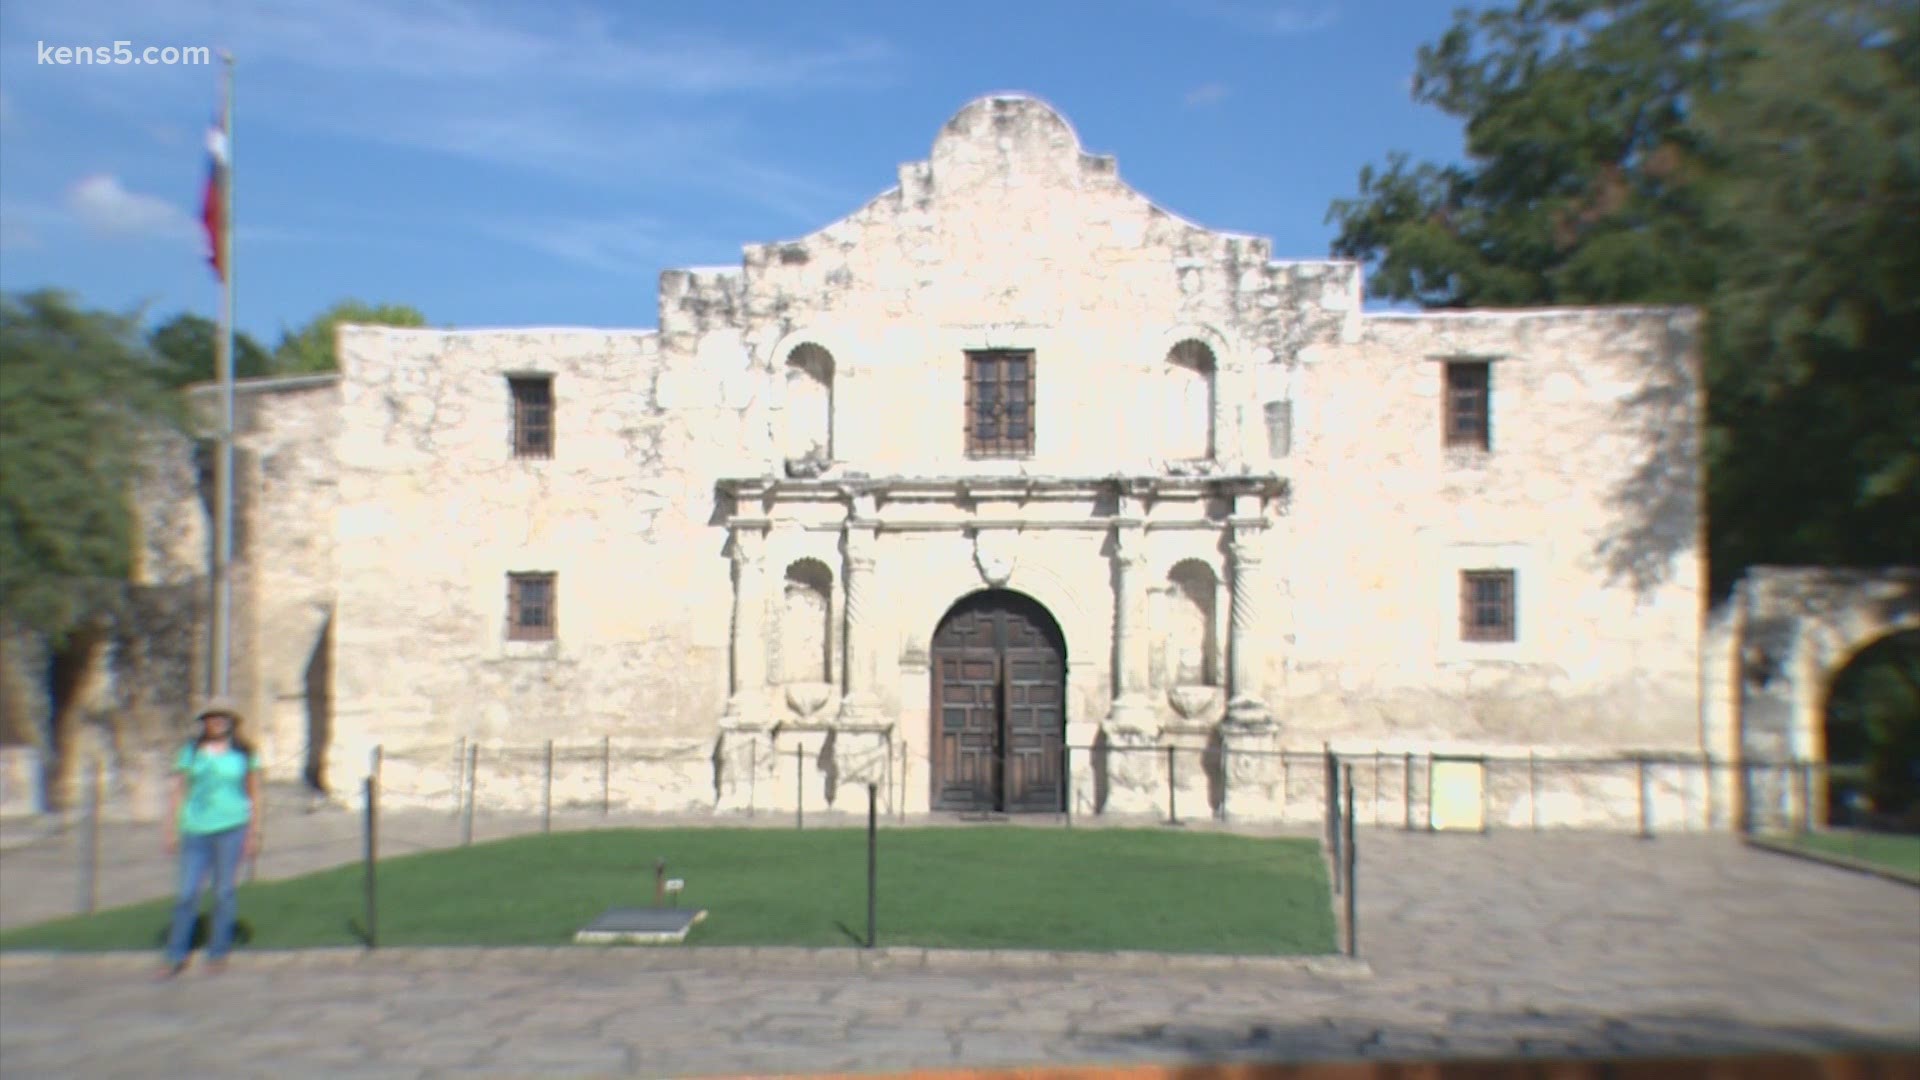 The Alamo is widely considered a symbol of Texas liberty, but, according to some historians, it’s story is available to us largely thanks to a slave.